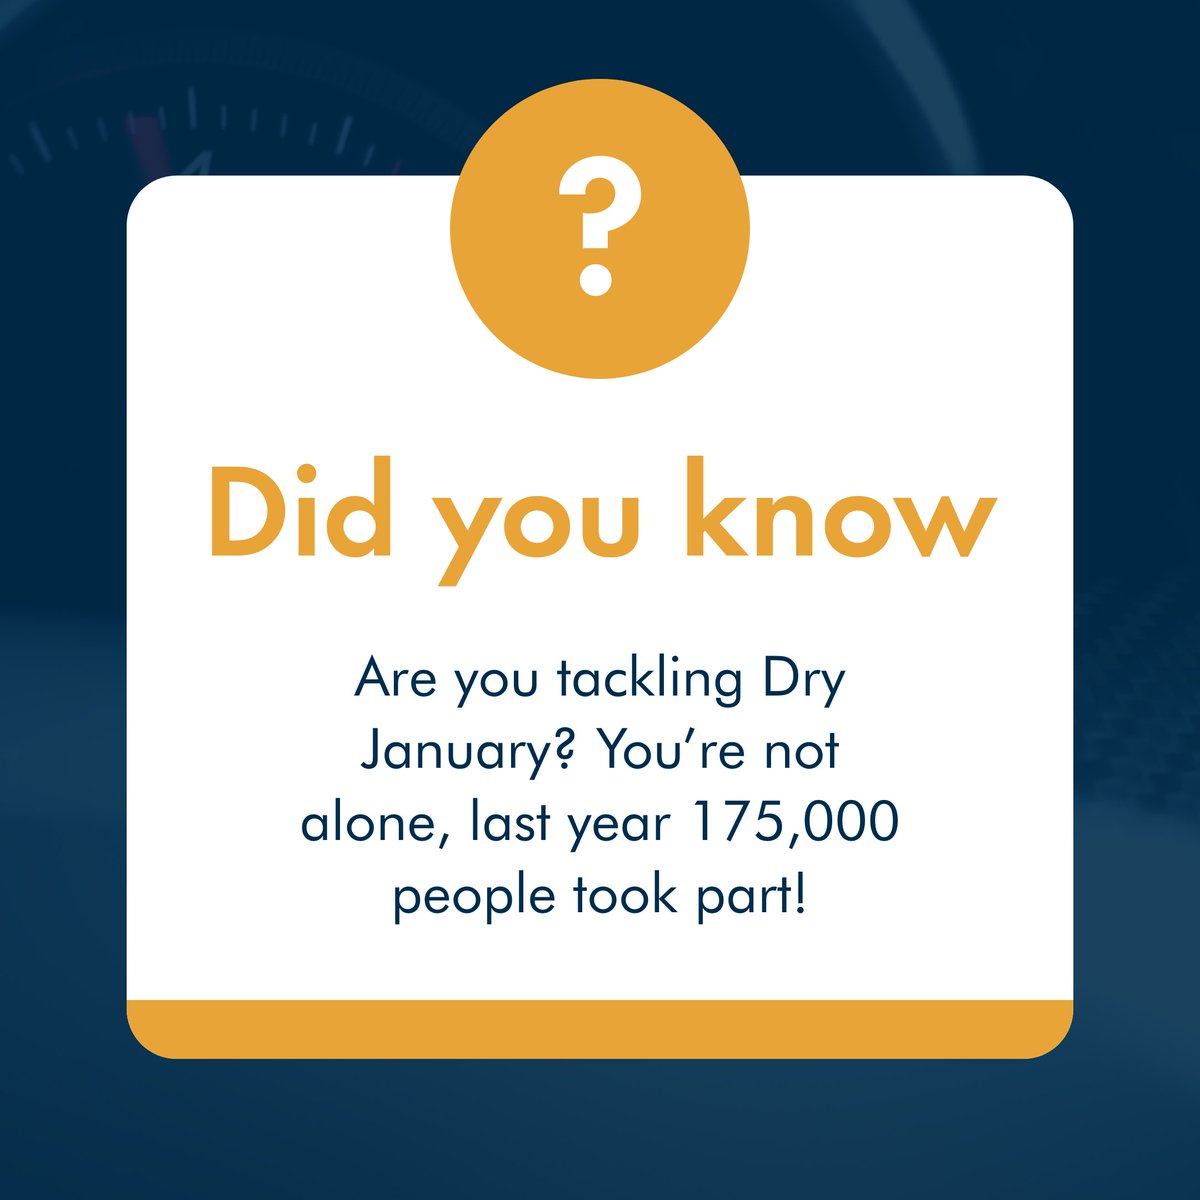 Are you tackling Dry Jan? If you're not partaking, don't forget the importance of staying safe on the roads: 🚗 Designated driver 🚗 Taxis 🚗 Public transport 🚗 Non-alcoholic options If you're in a difficult situation following a road traffic accident 📞 01282 433241